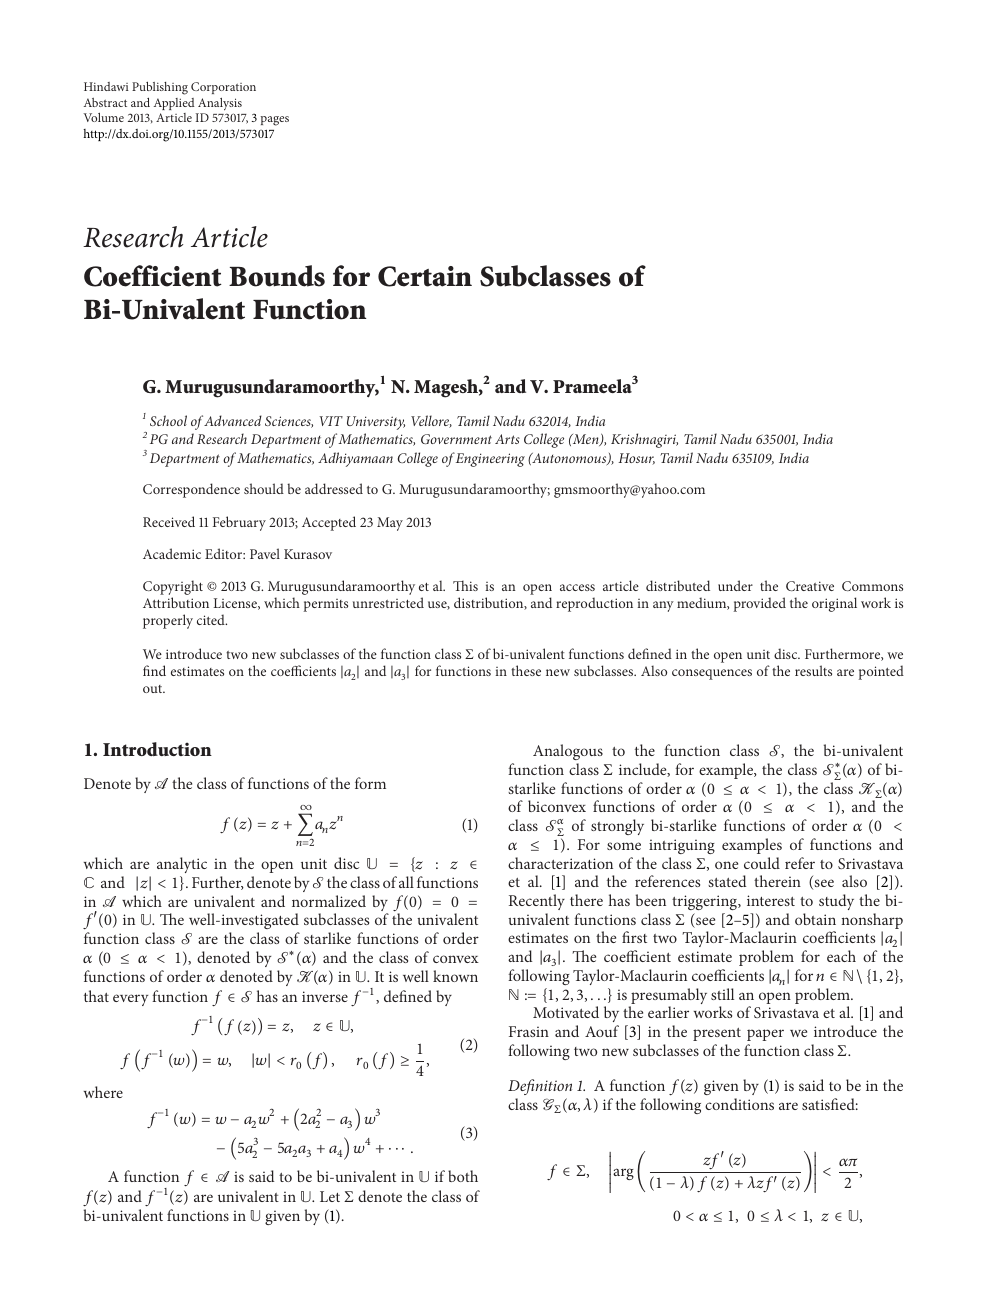 Coefficient Bounds For Certain Subclasses Of Bi Univalent Function Topic Of Research Paper In Mathematics Download Scholarly Article Pdf And Read For Free On Cyberleninka Open Science Hub